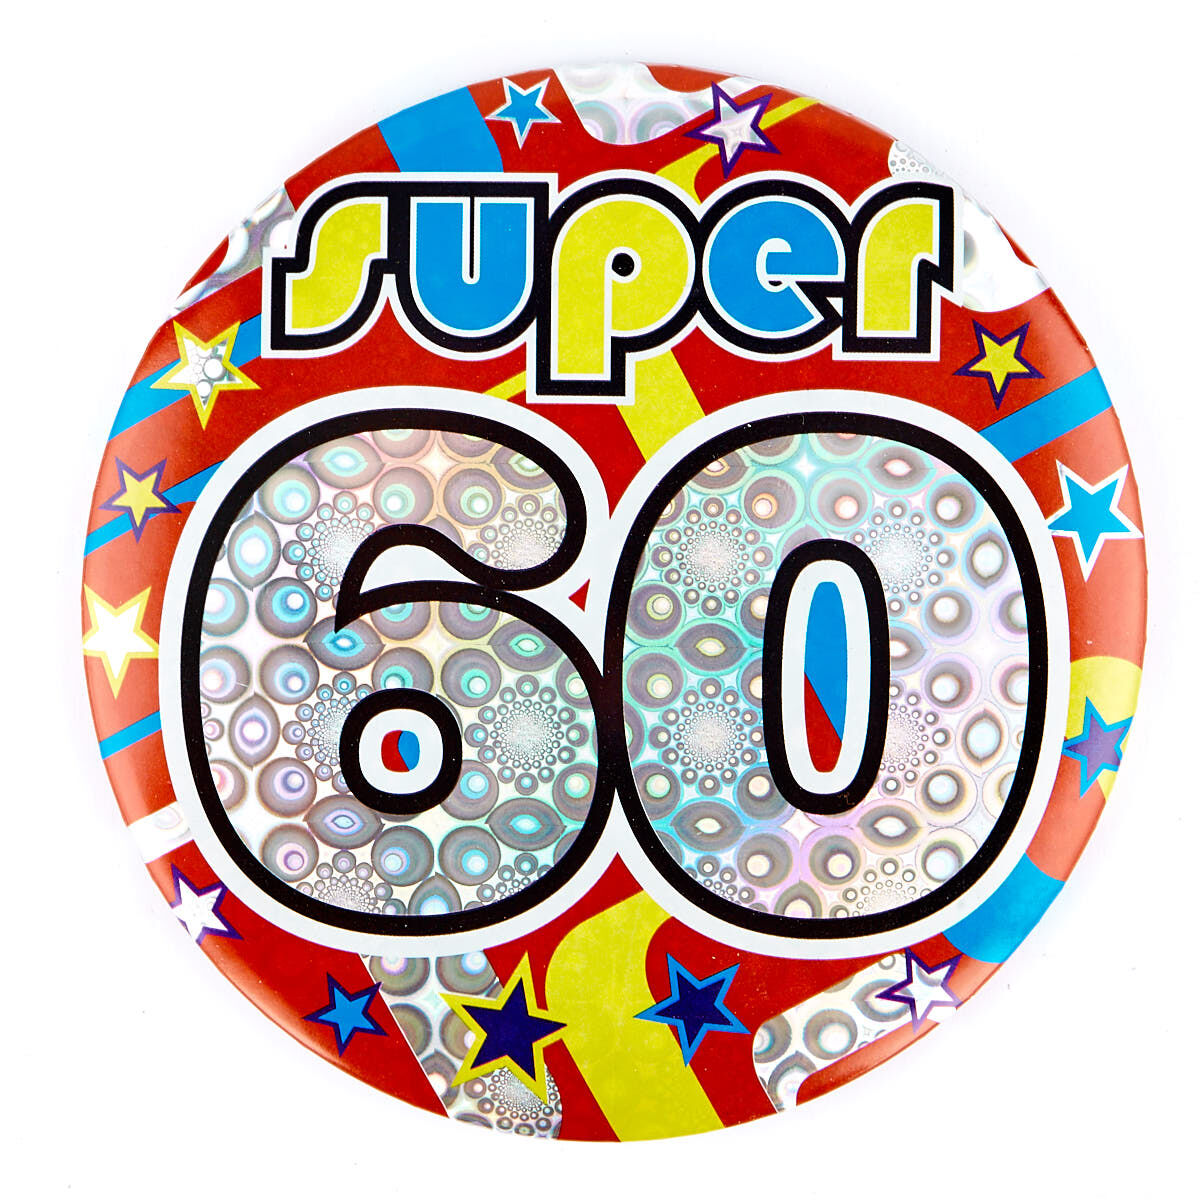 NEW LARGE HOLOGRAPHIC 60 TODAY BIRTHDAY BADGE GIANT 